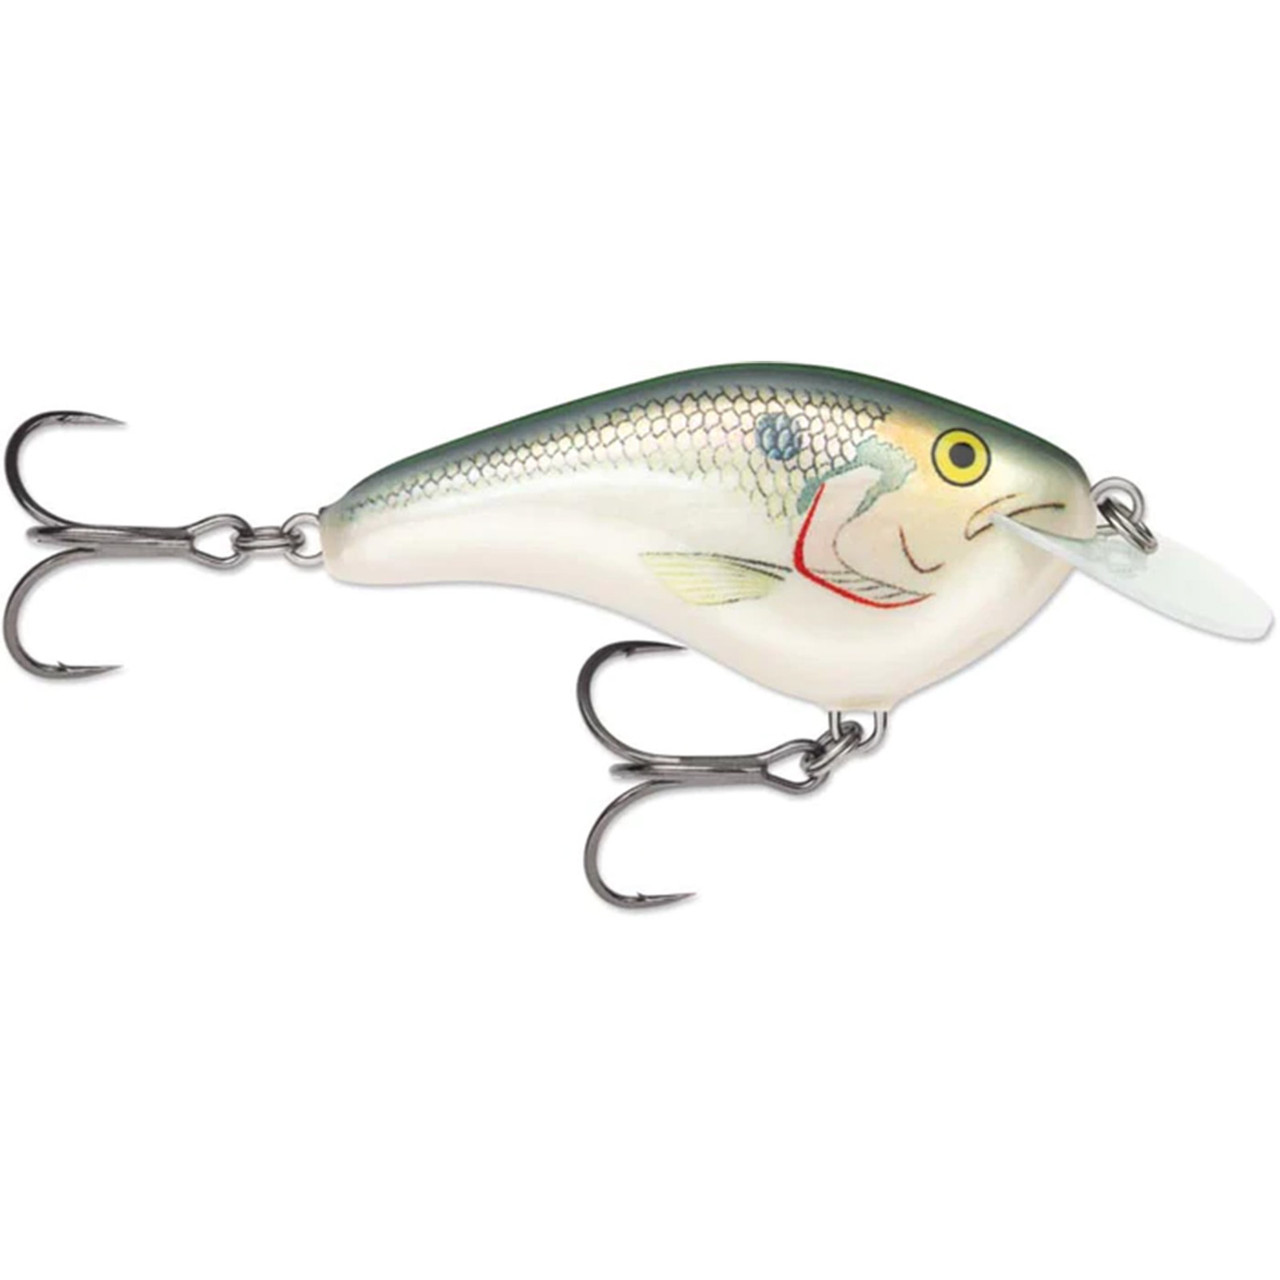 Rapala OG Slim 06 Medium Diving Flat-Sided Crankbait Shad - Fin Feather Fur  Outfitters